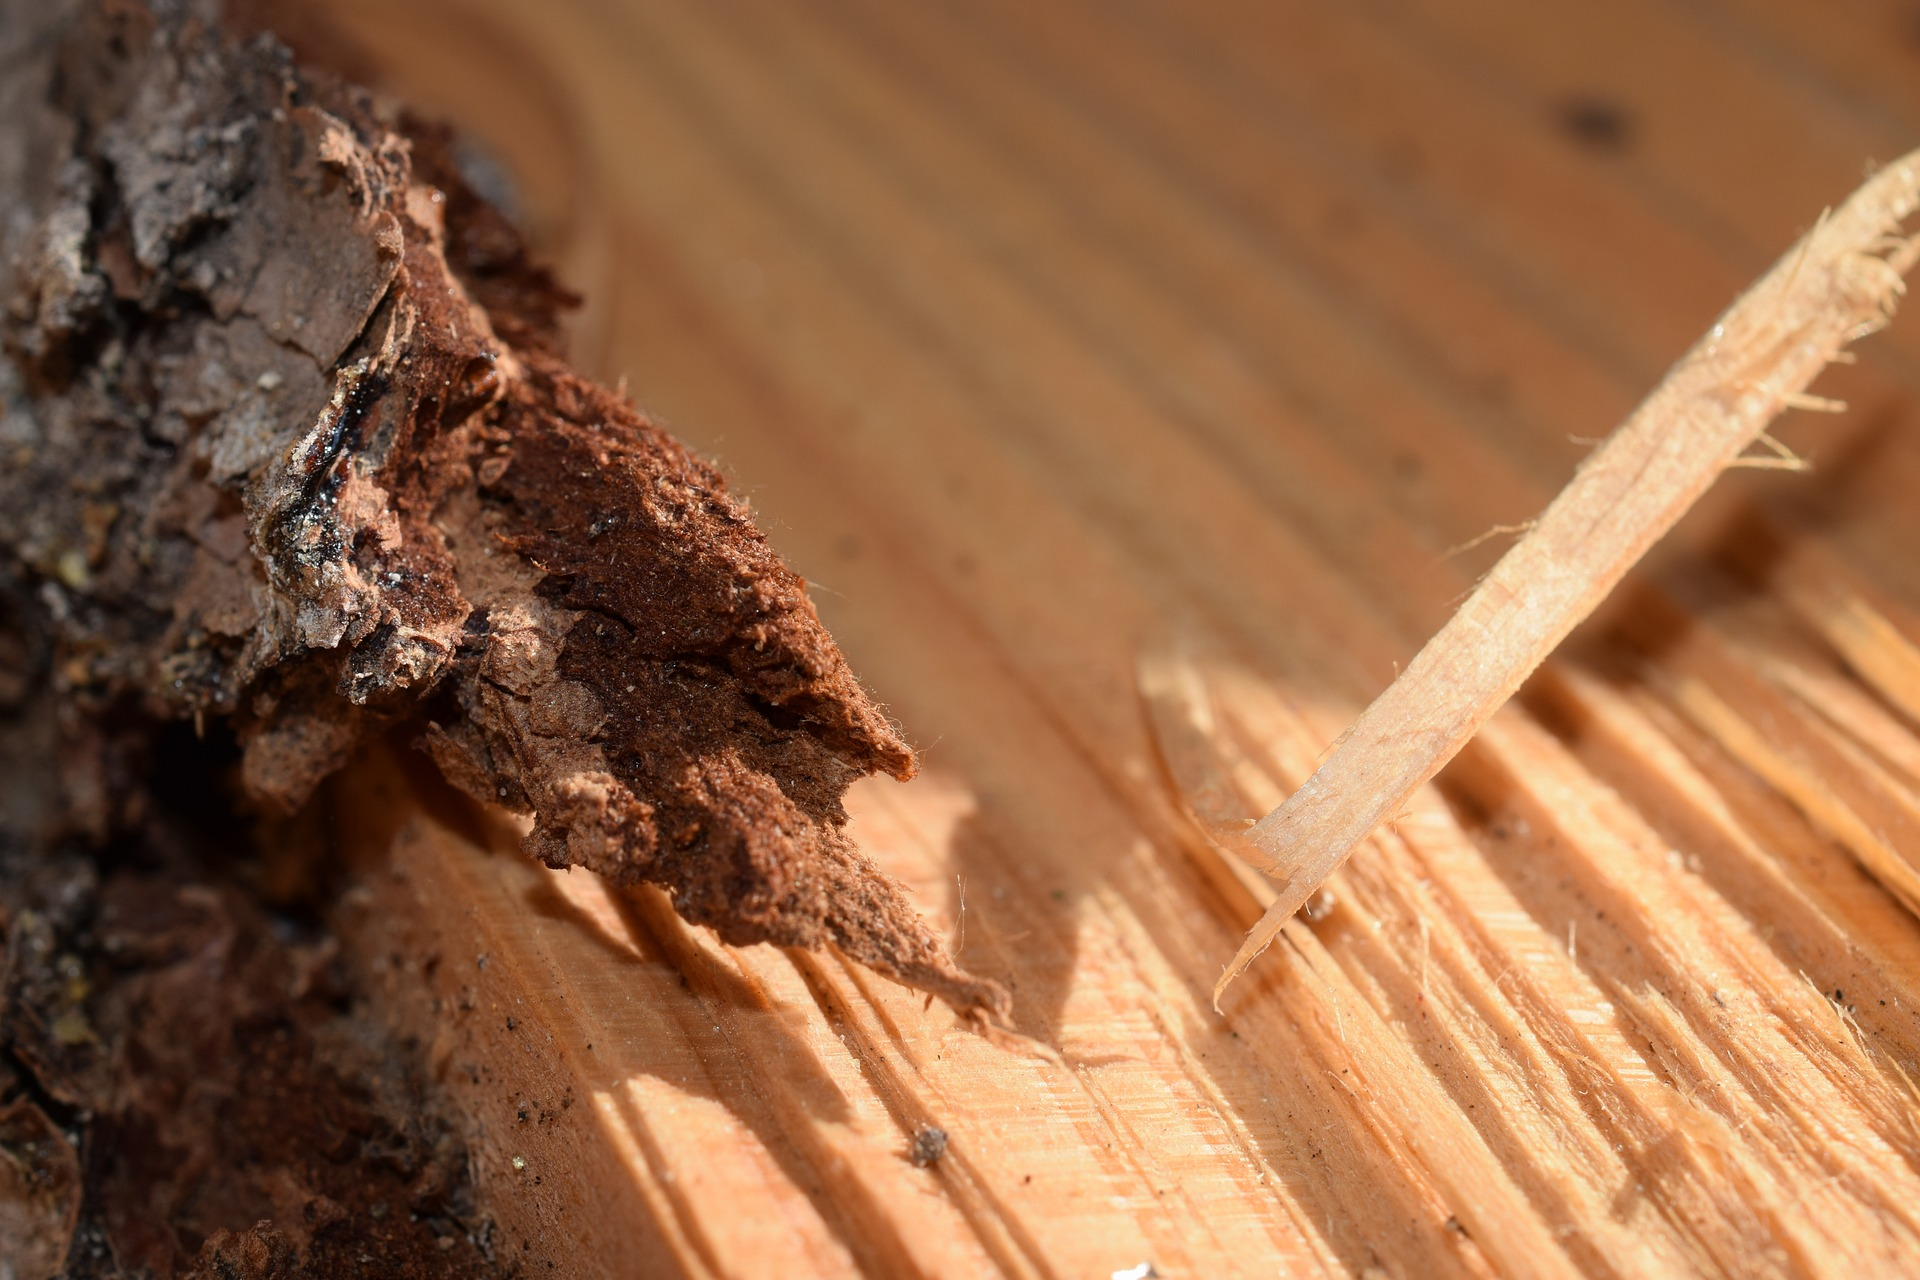 How To Get Rid of Woodworm